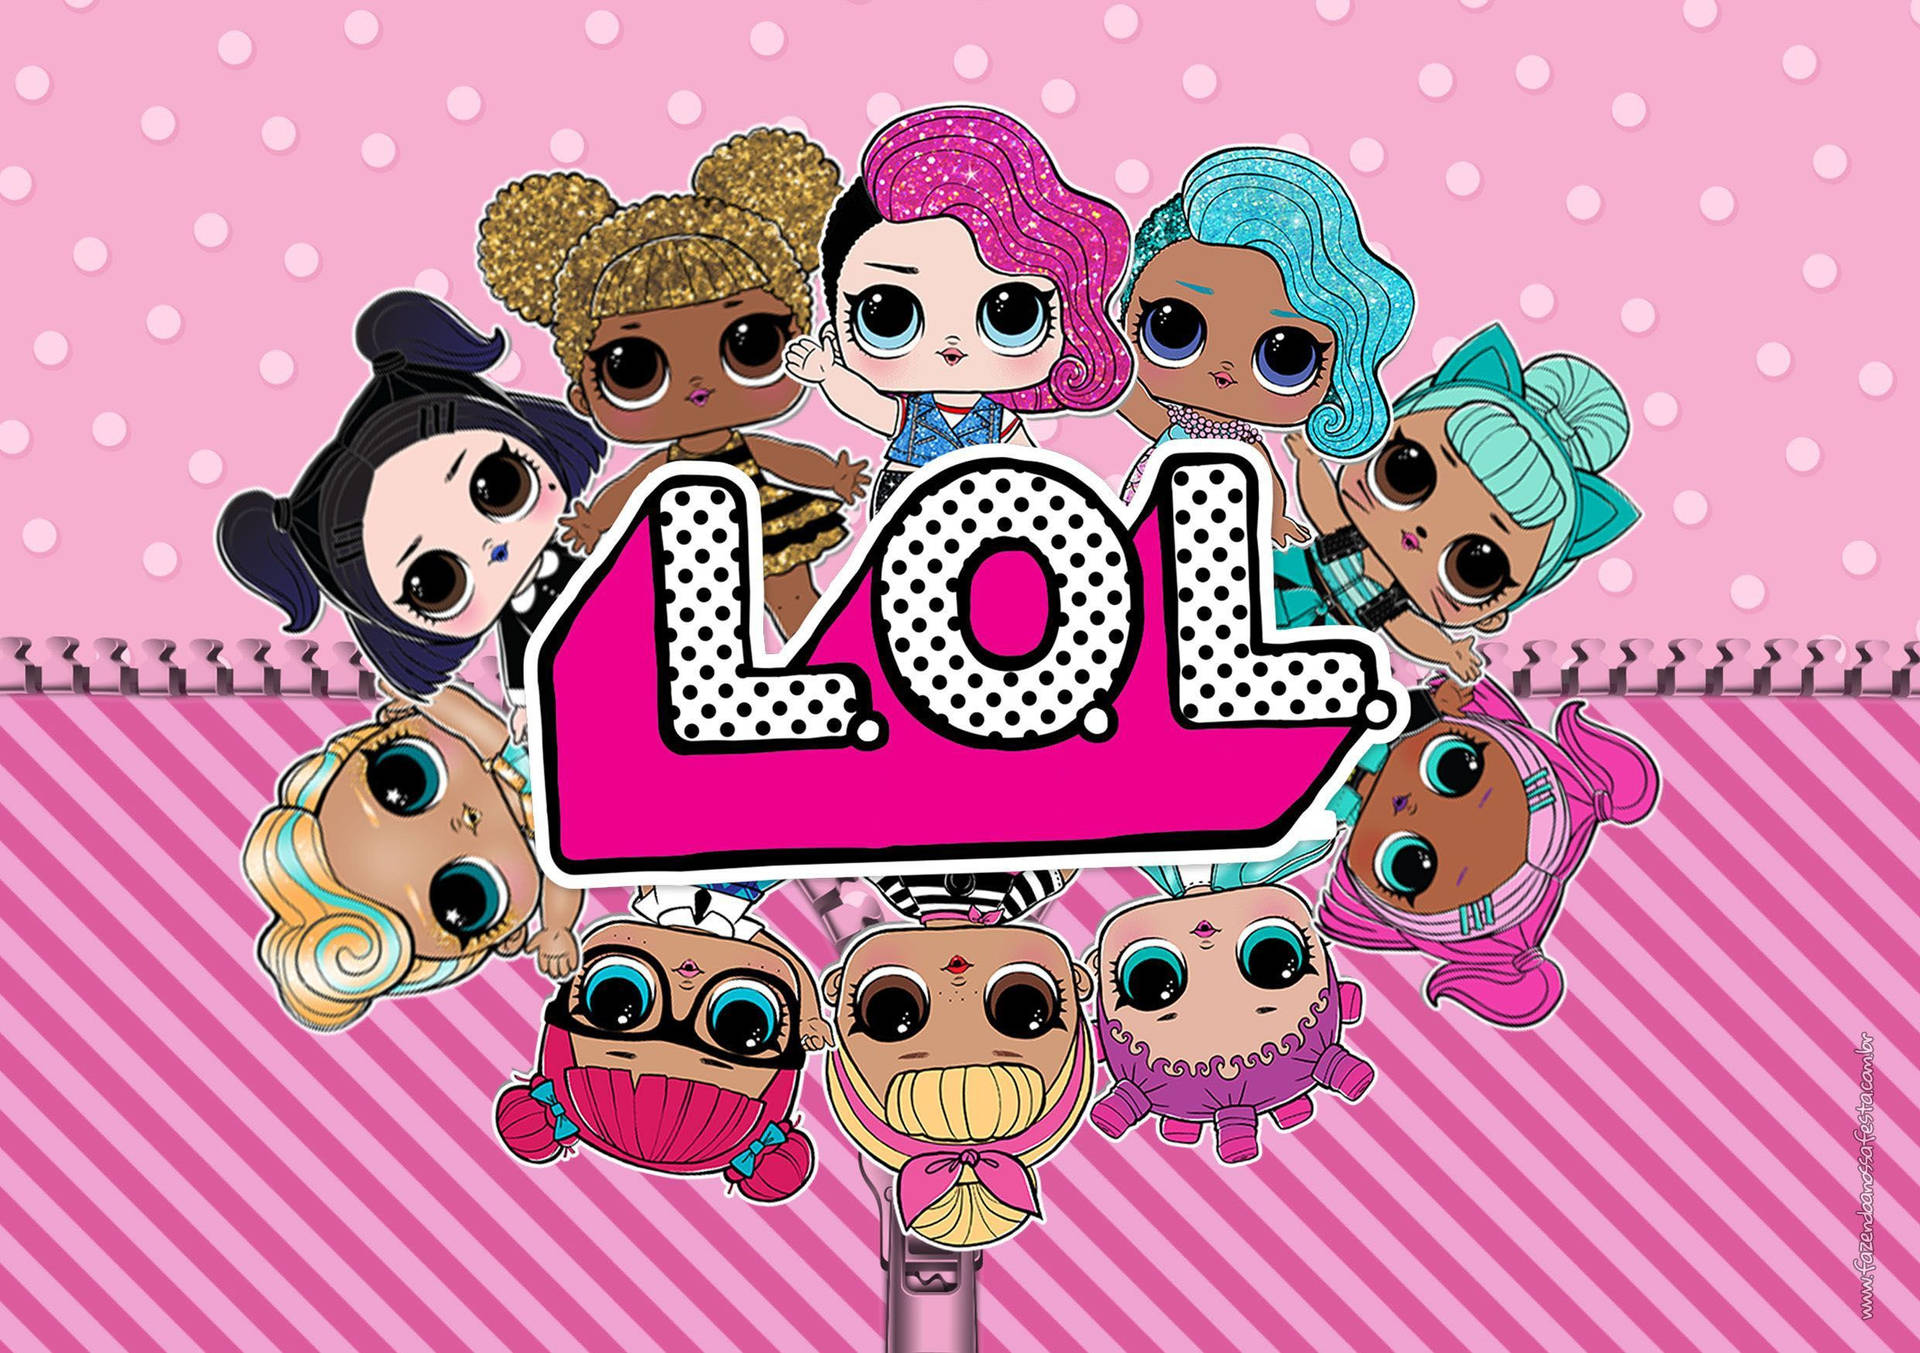 Free Lol Doll Wallpaper Downloads, [100+] Lol Doll Wallpapers for FREE |  